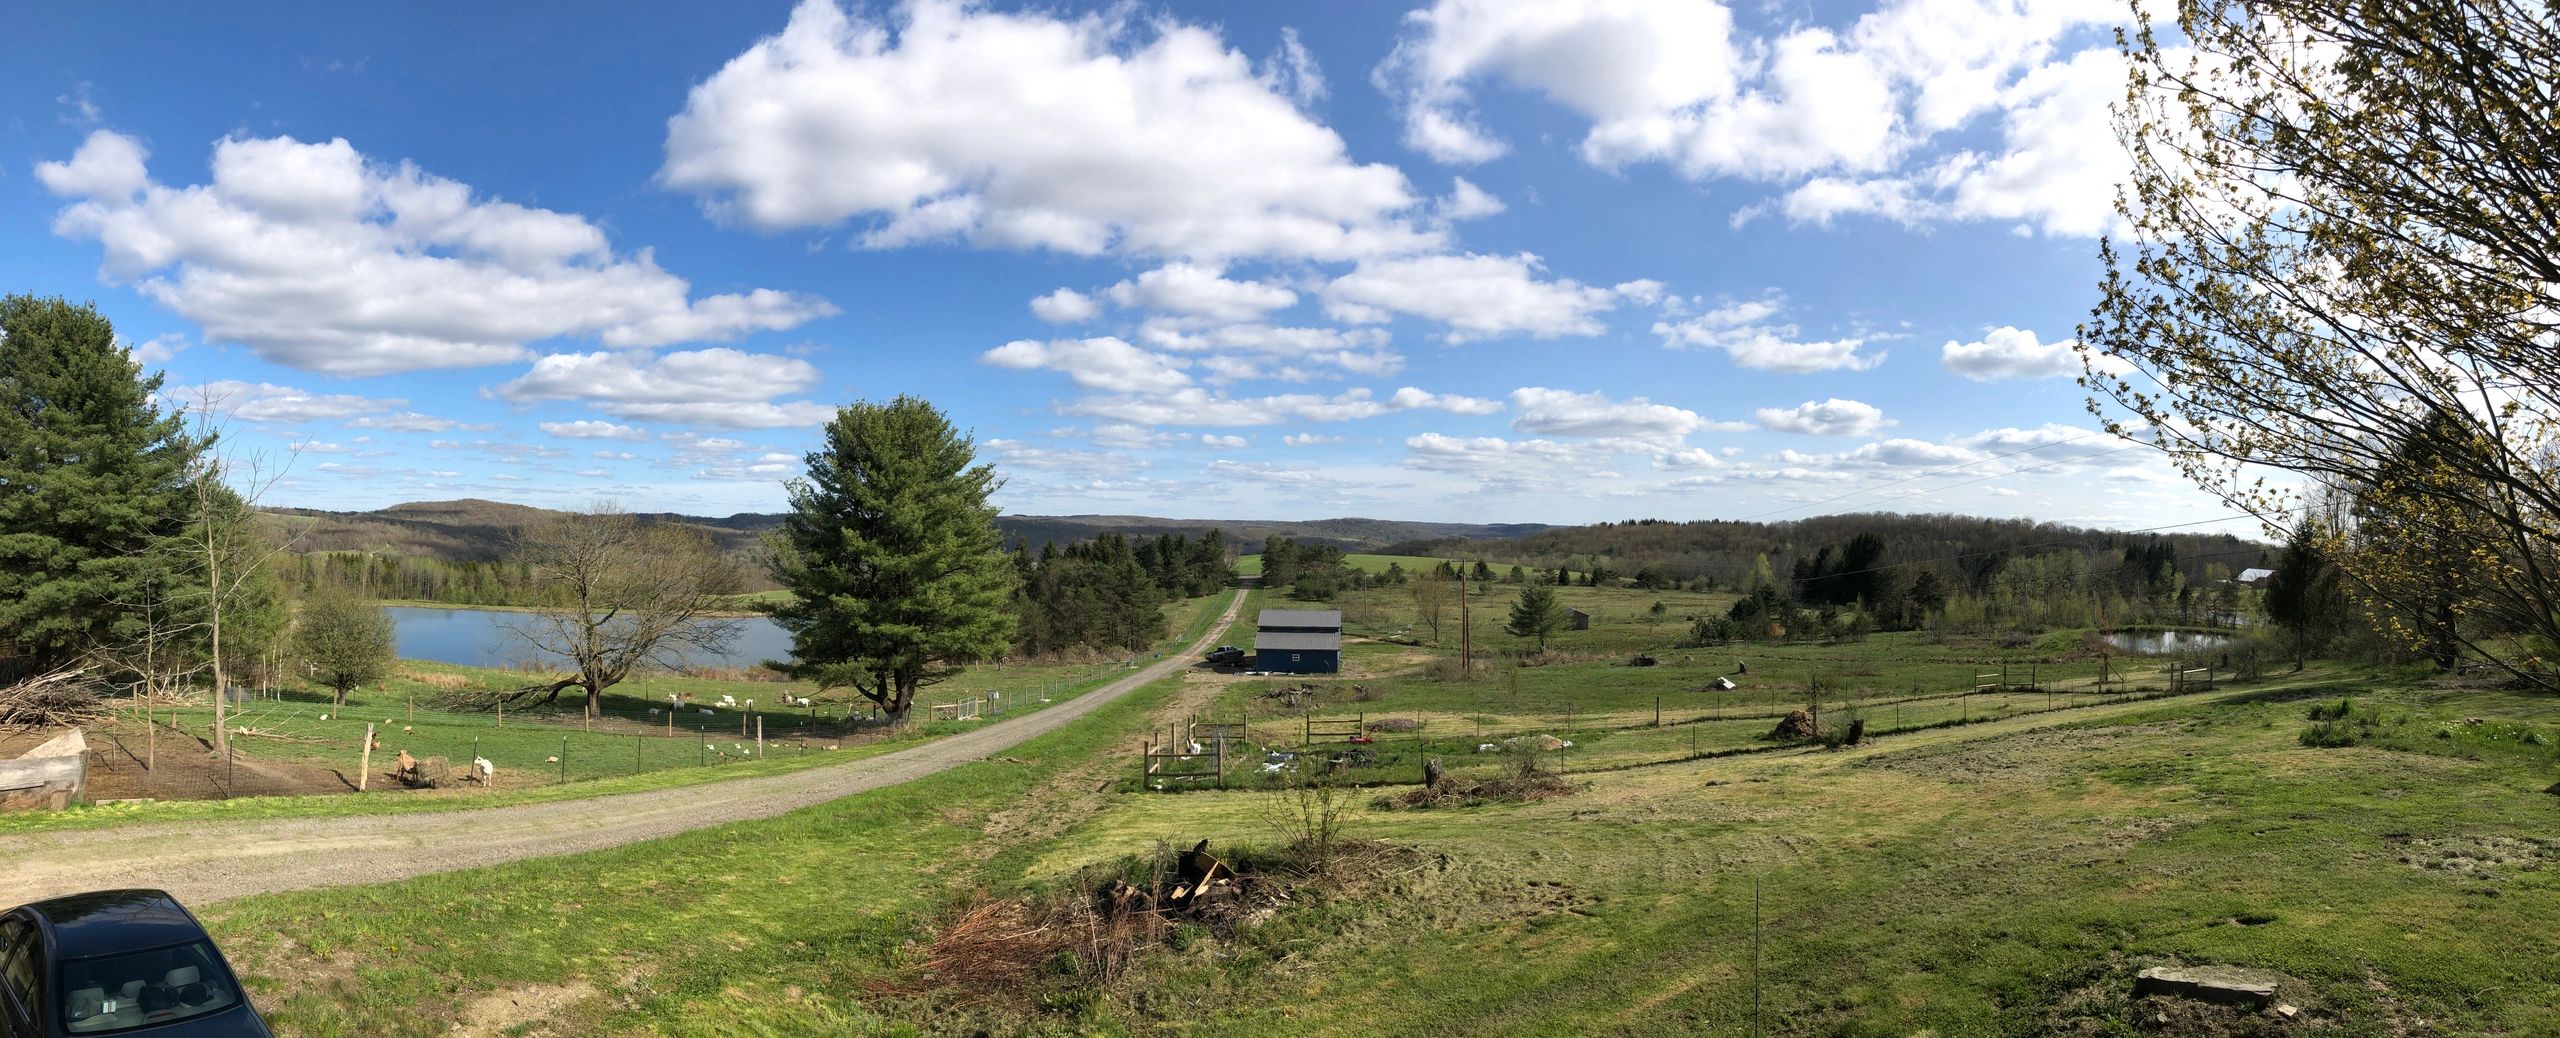 Taken March 16, 2020 from the front deck of our home.  Center is Nellie's Knoll Creamery.